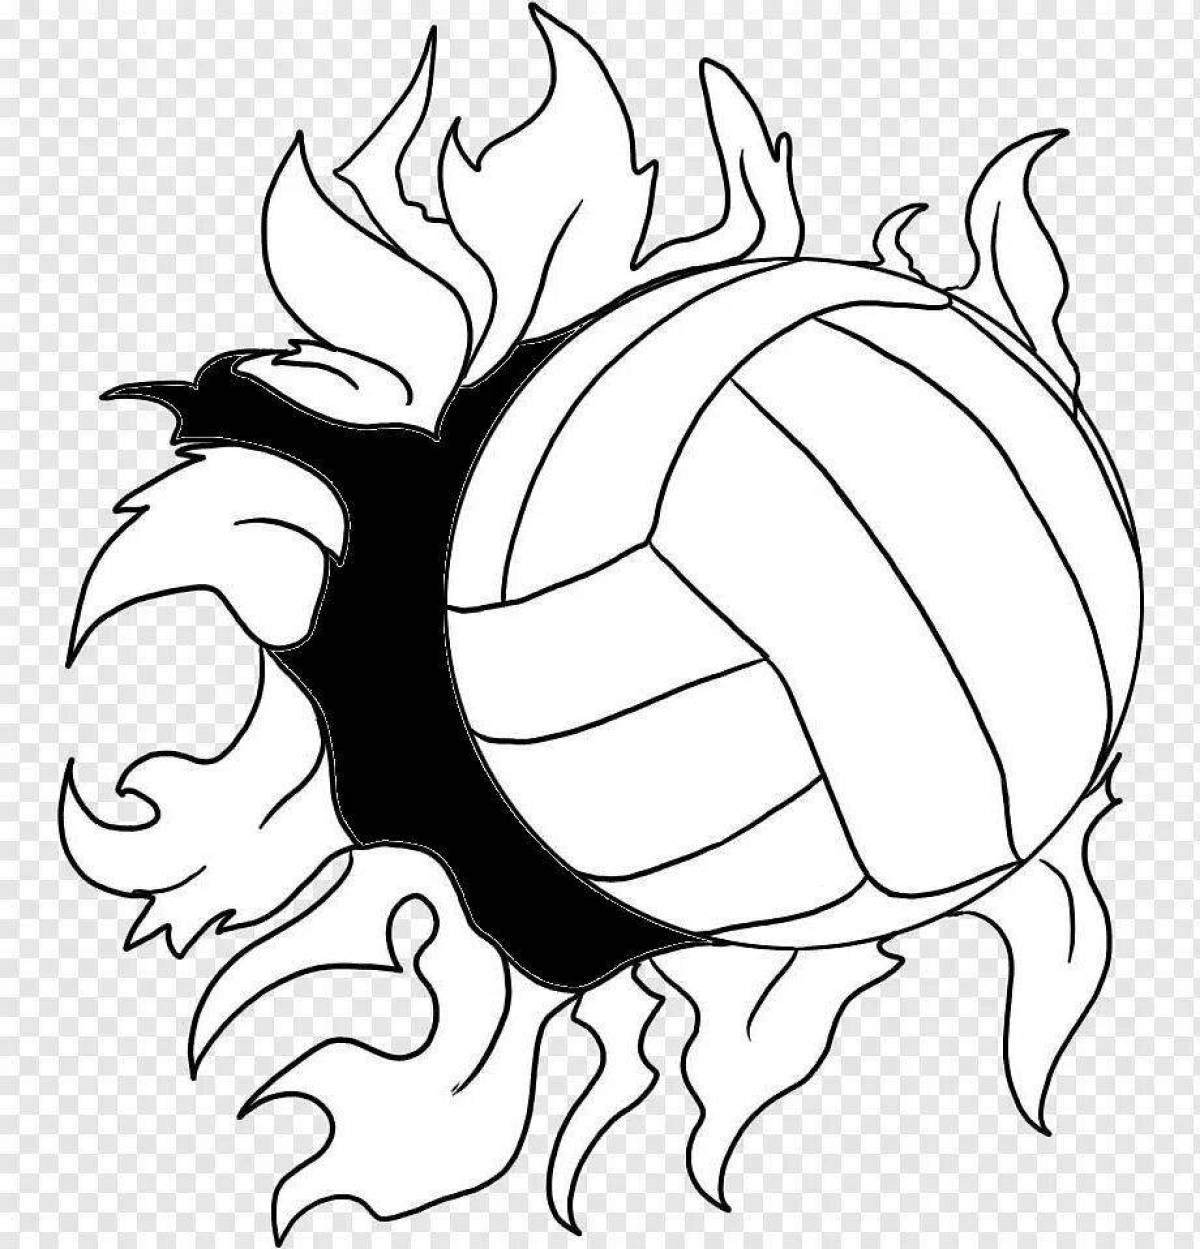 Live volleyball coloring book